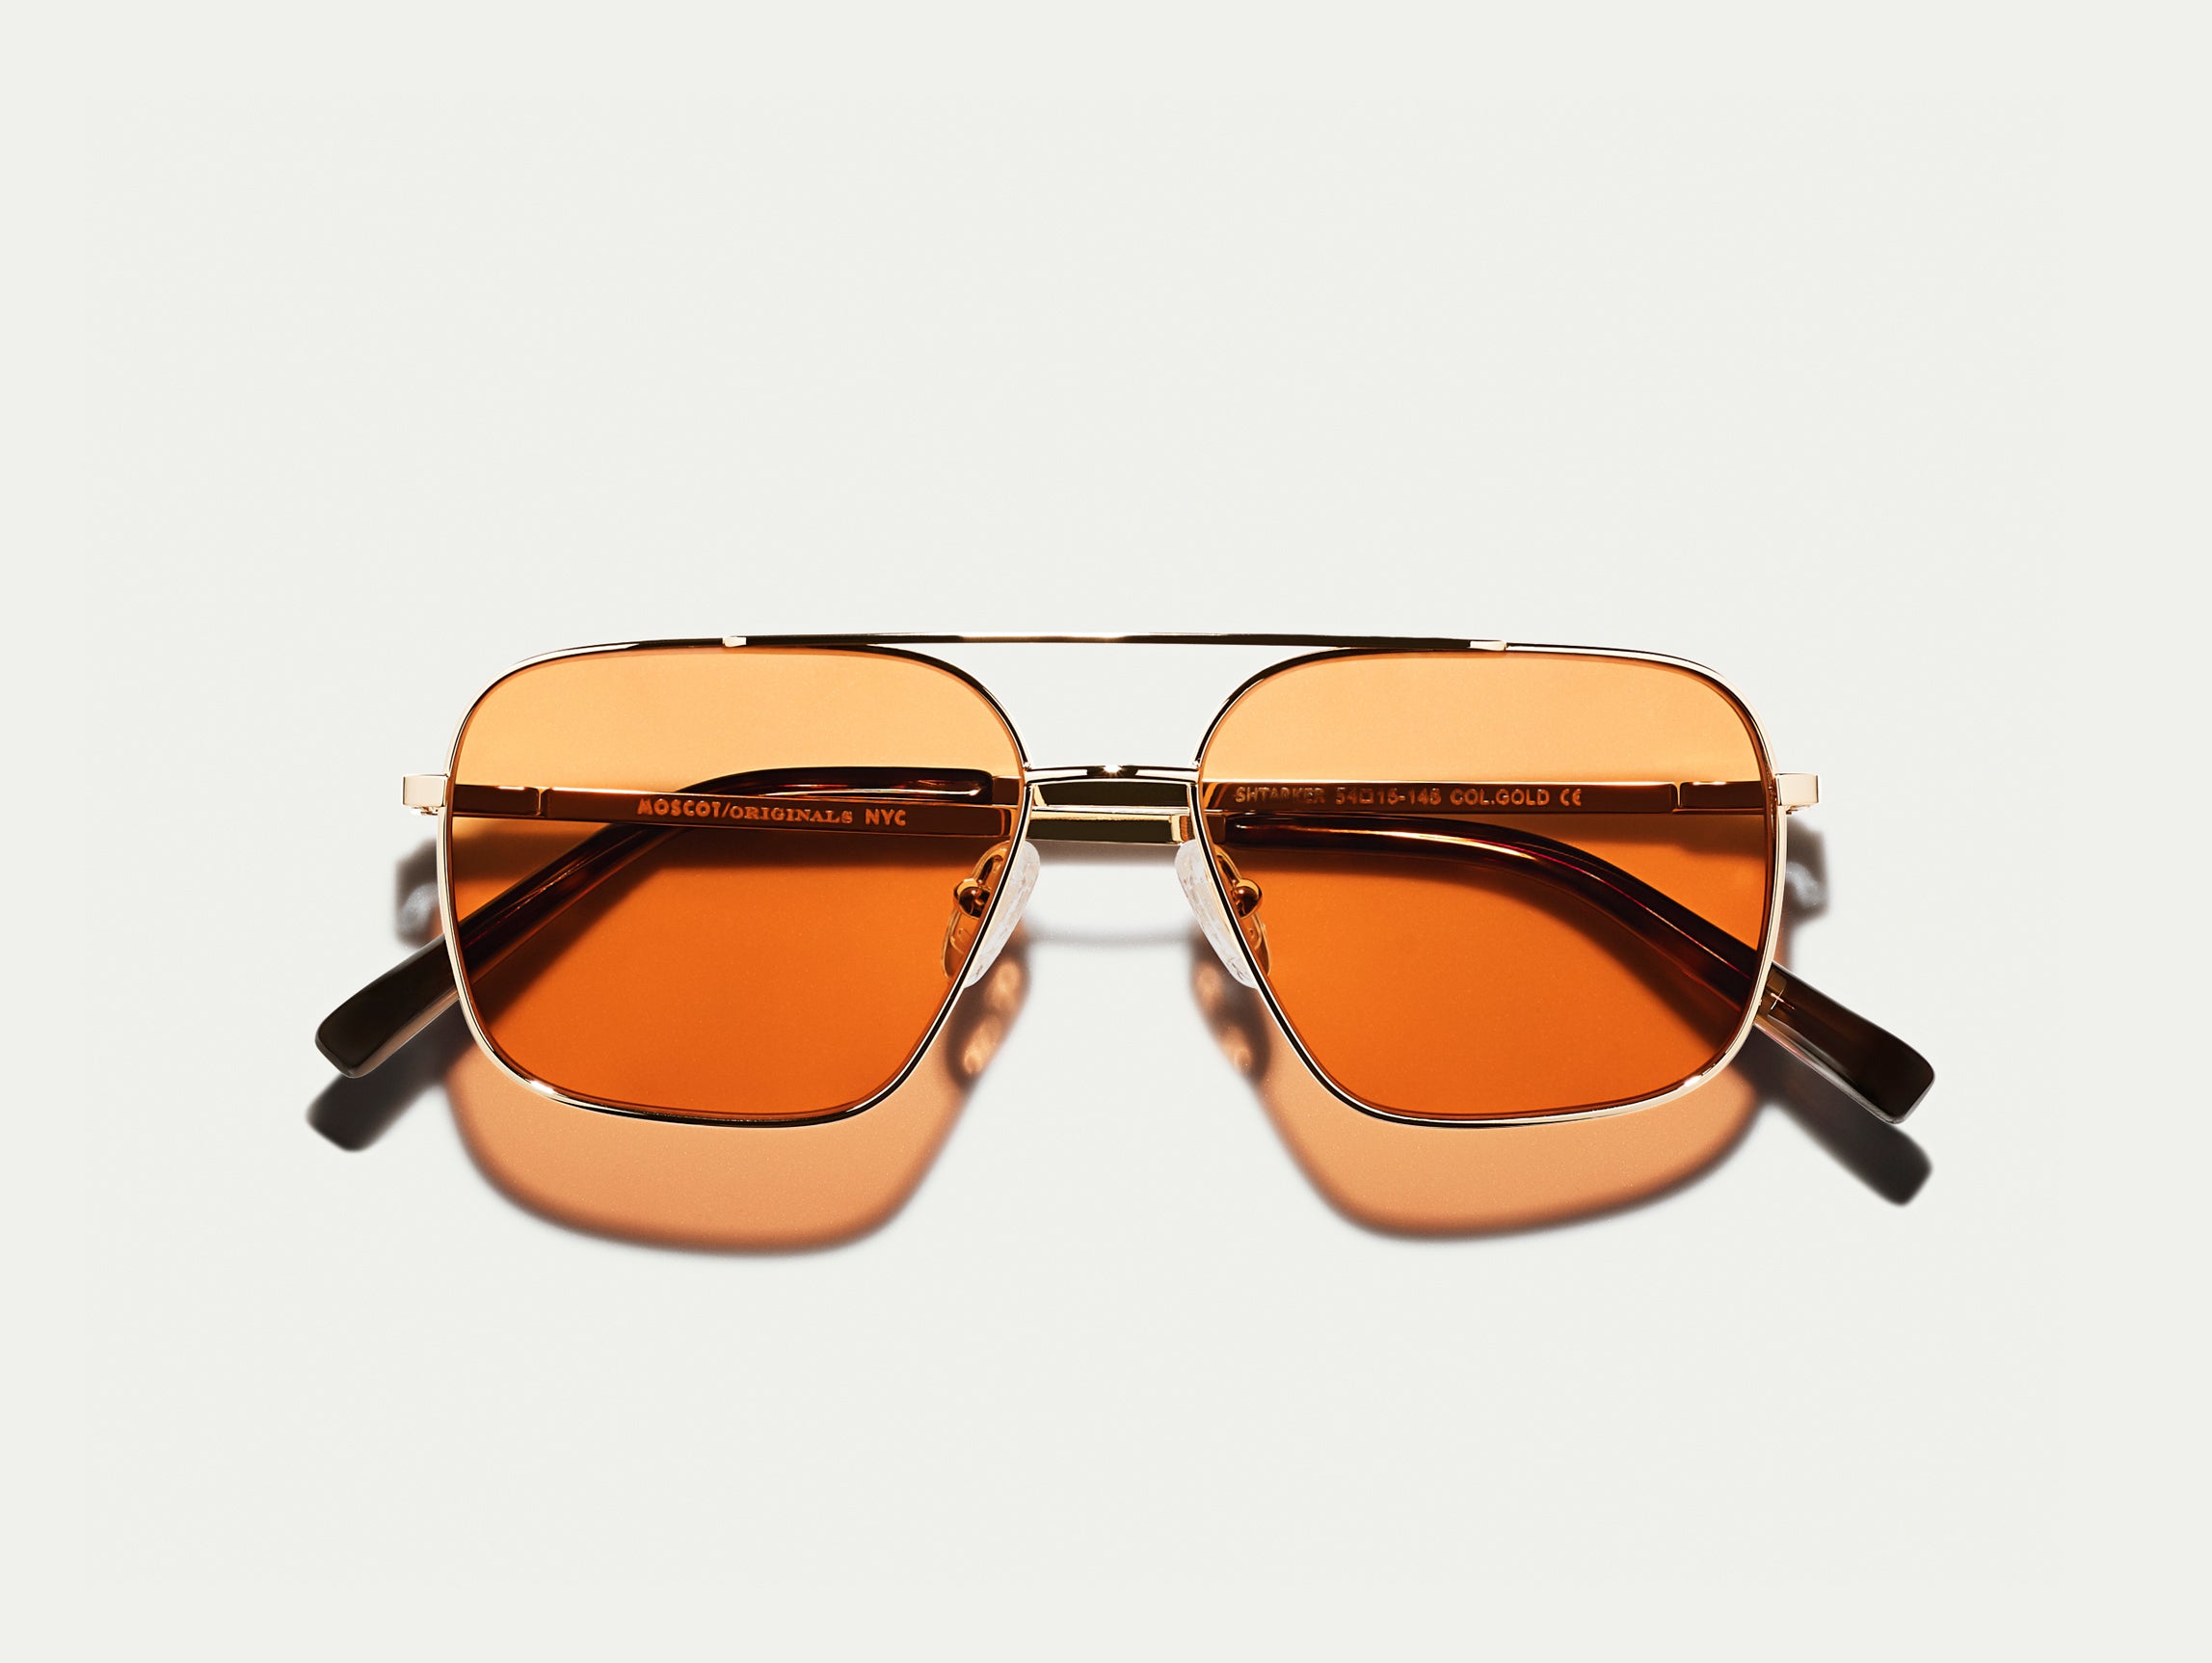 The SHTARKER in Gold with Woodstock Orange Tinted Lenses